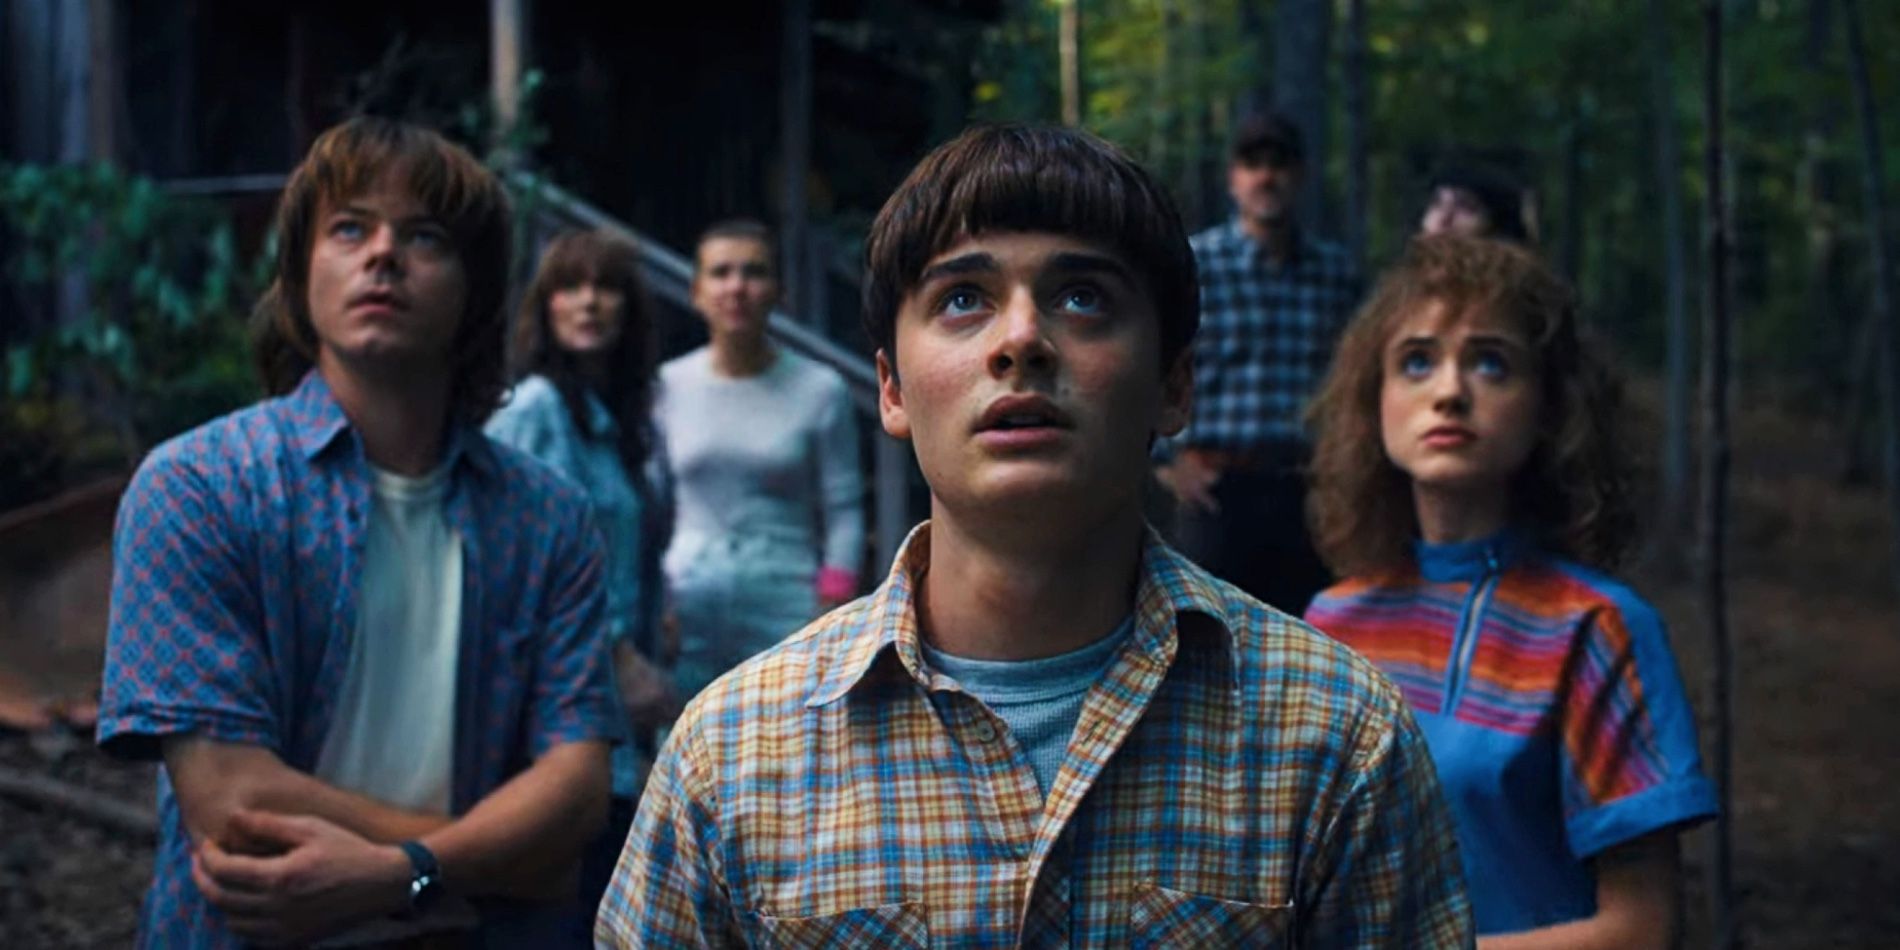 Will looks at the sky in Stranger Things 4 finale